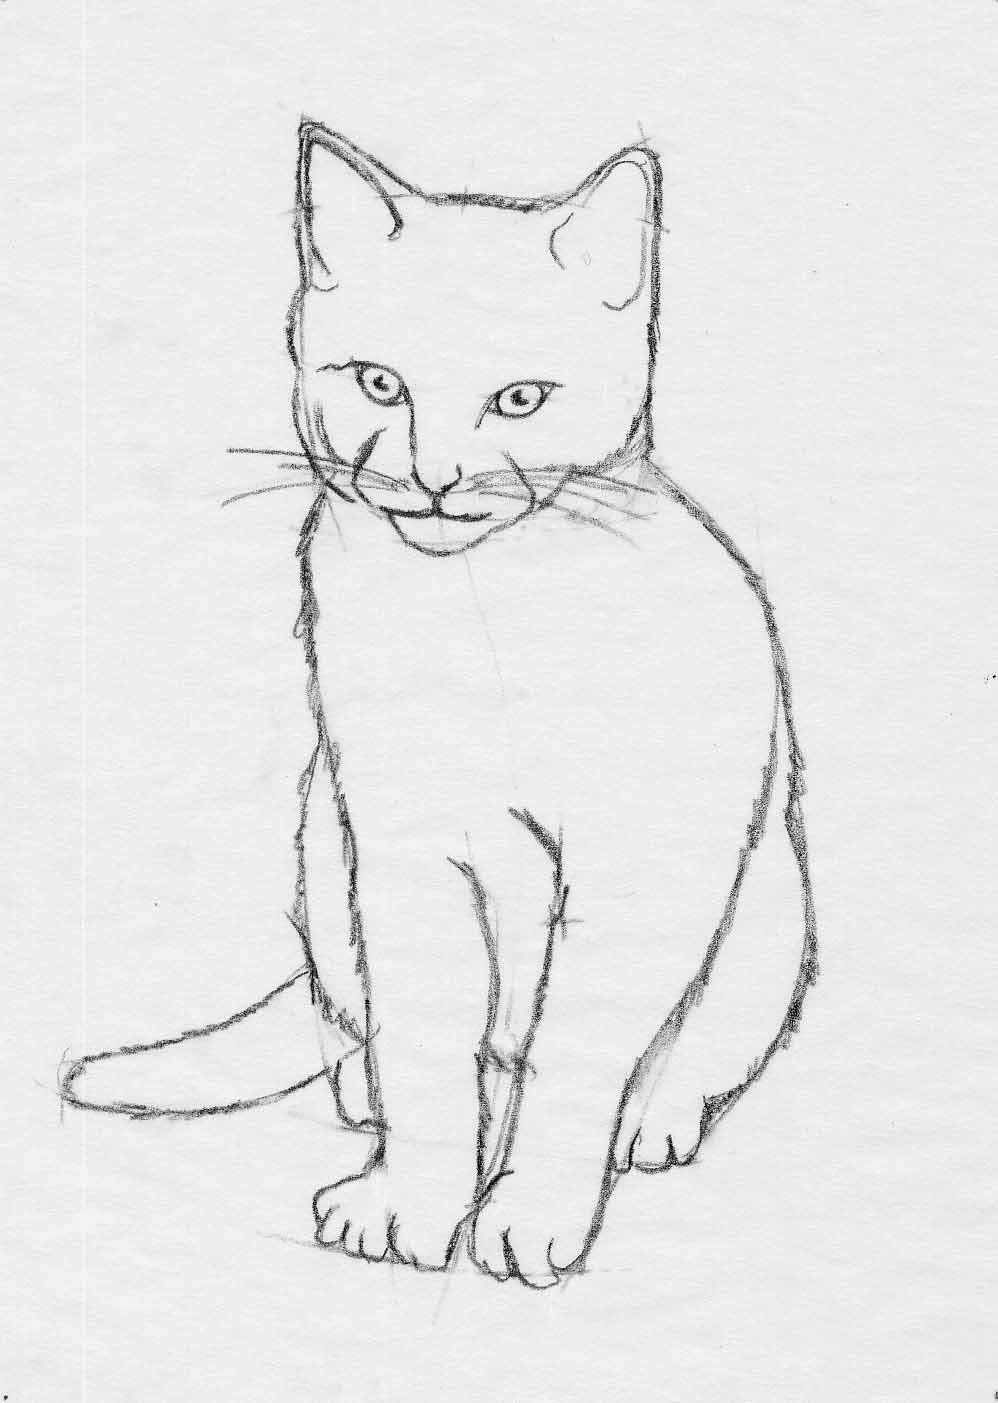 Google Image Result for http://drawcircle.com/images/lesson/cat_drawing